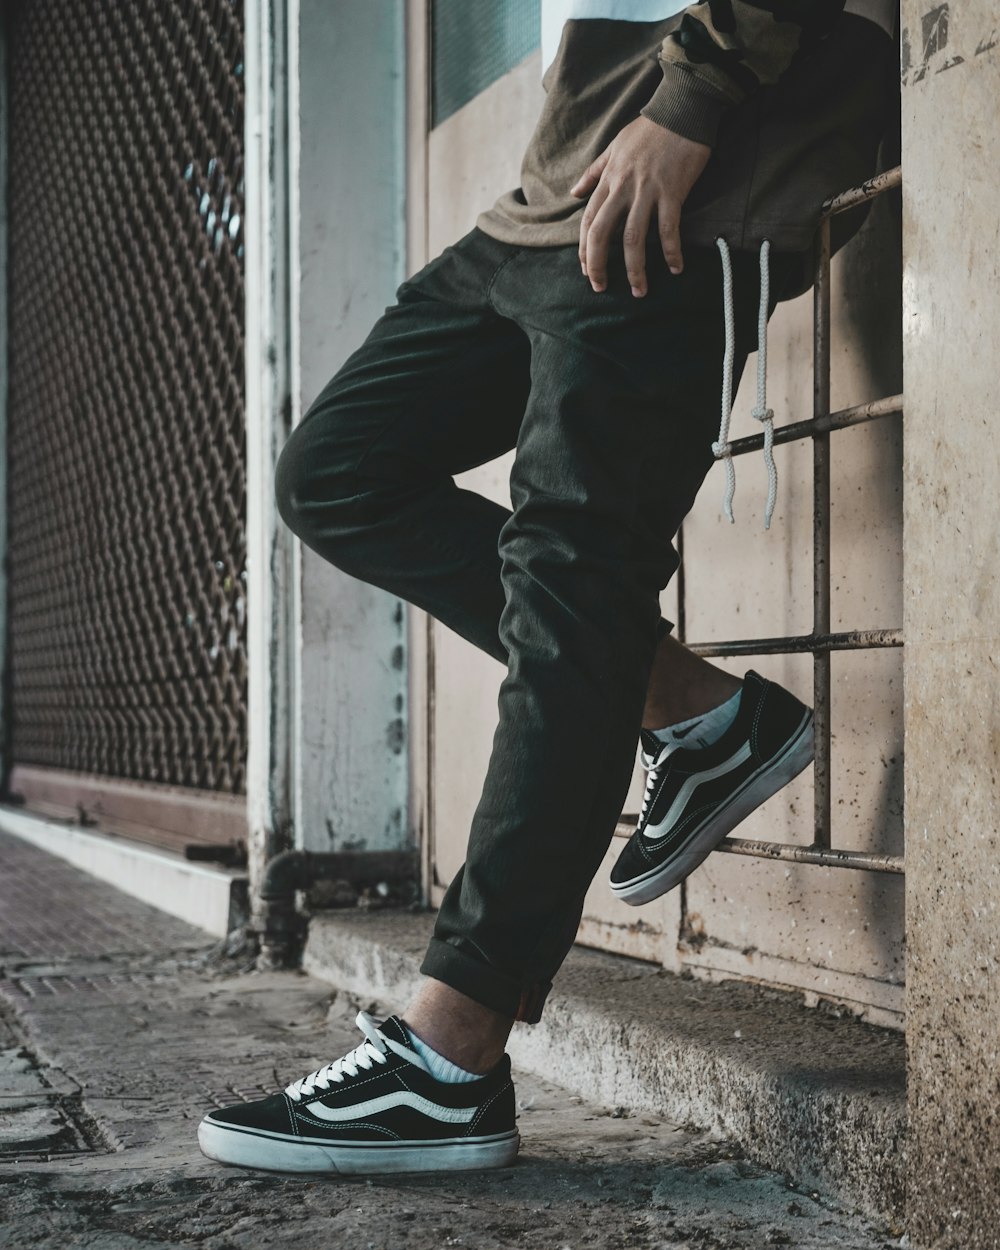 A man leaning against a wall wearing black and white sneakers photo – Free  Clothes Image on Unsplash